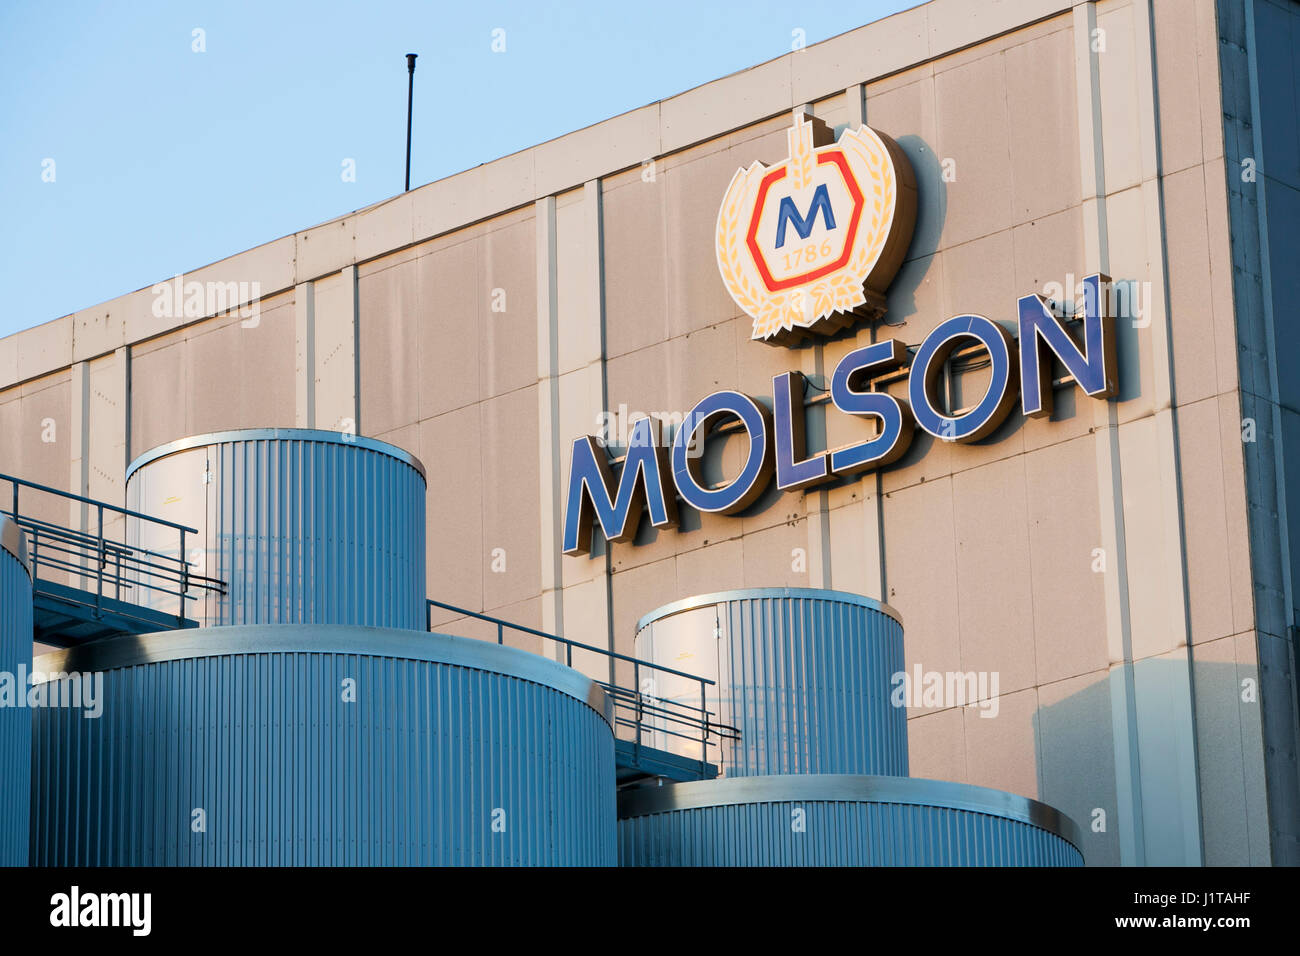 A logo sign outside of the Molson beer brewery in Etobicoke, Ontario, Canada, on April 15, 2017. Stock Photo